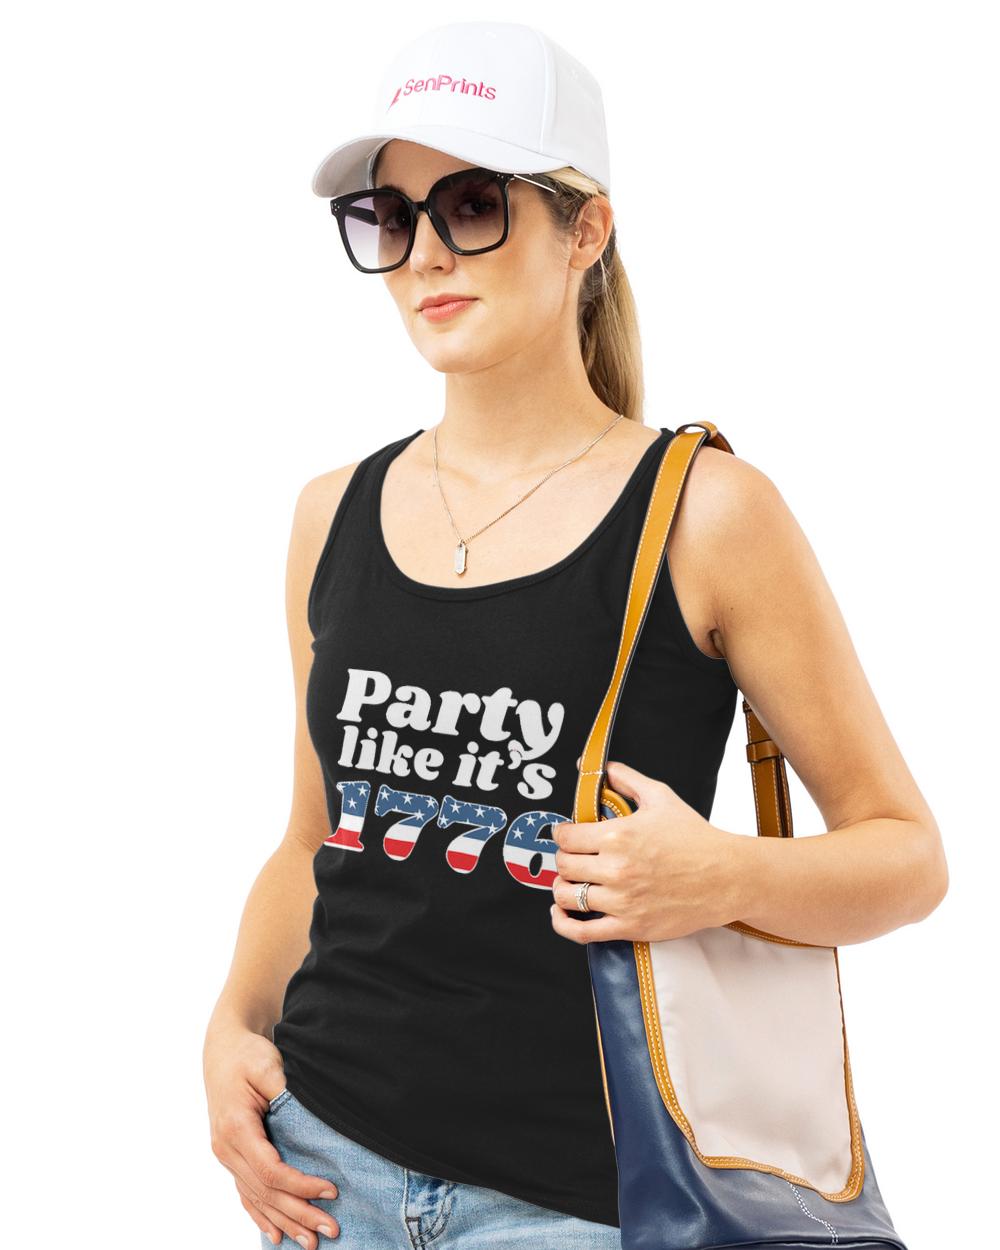 Party Like Its 1776 Independence Day T- Shirt American Flag 4th of July Patriotic Party Like It's 1776 Independence Day T- Shirt